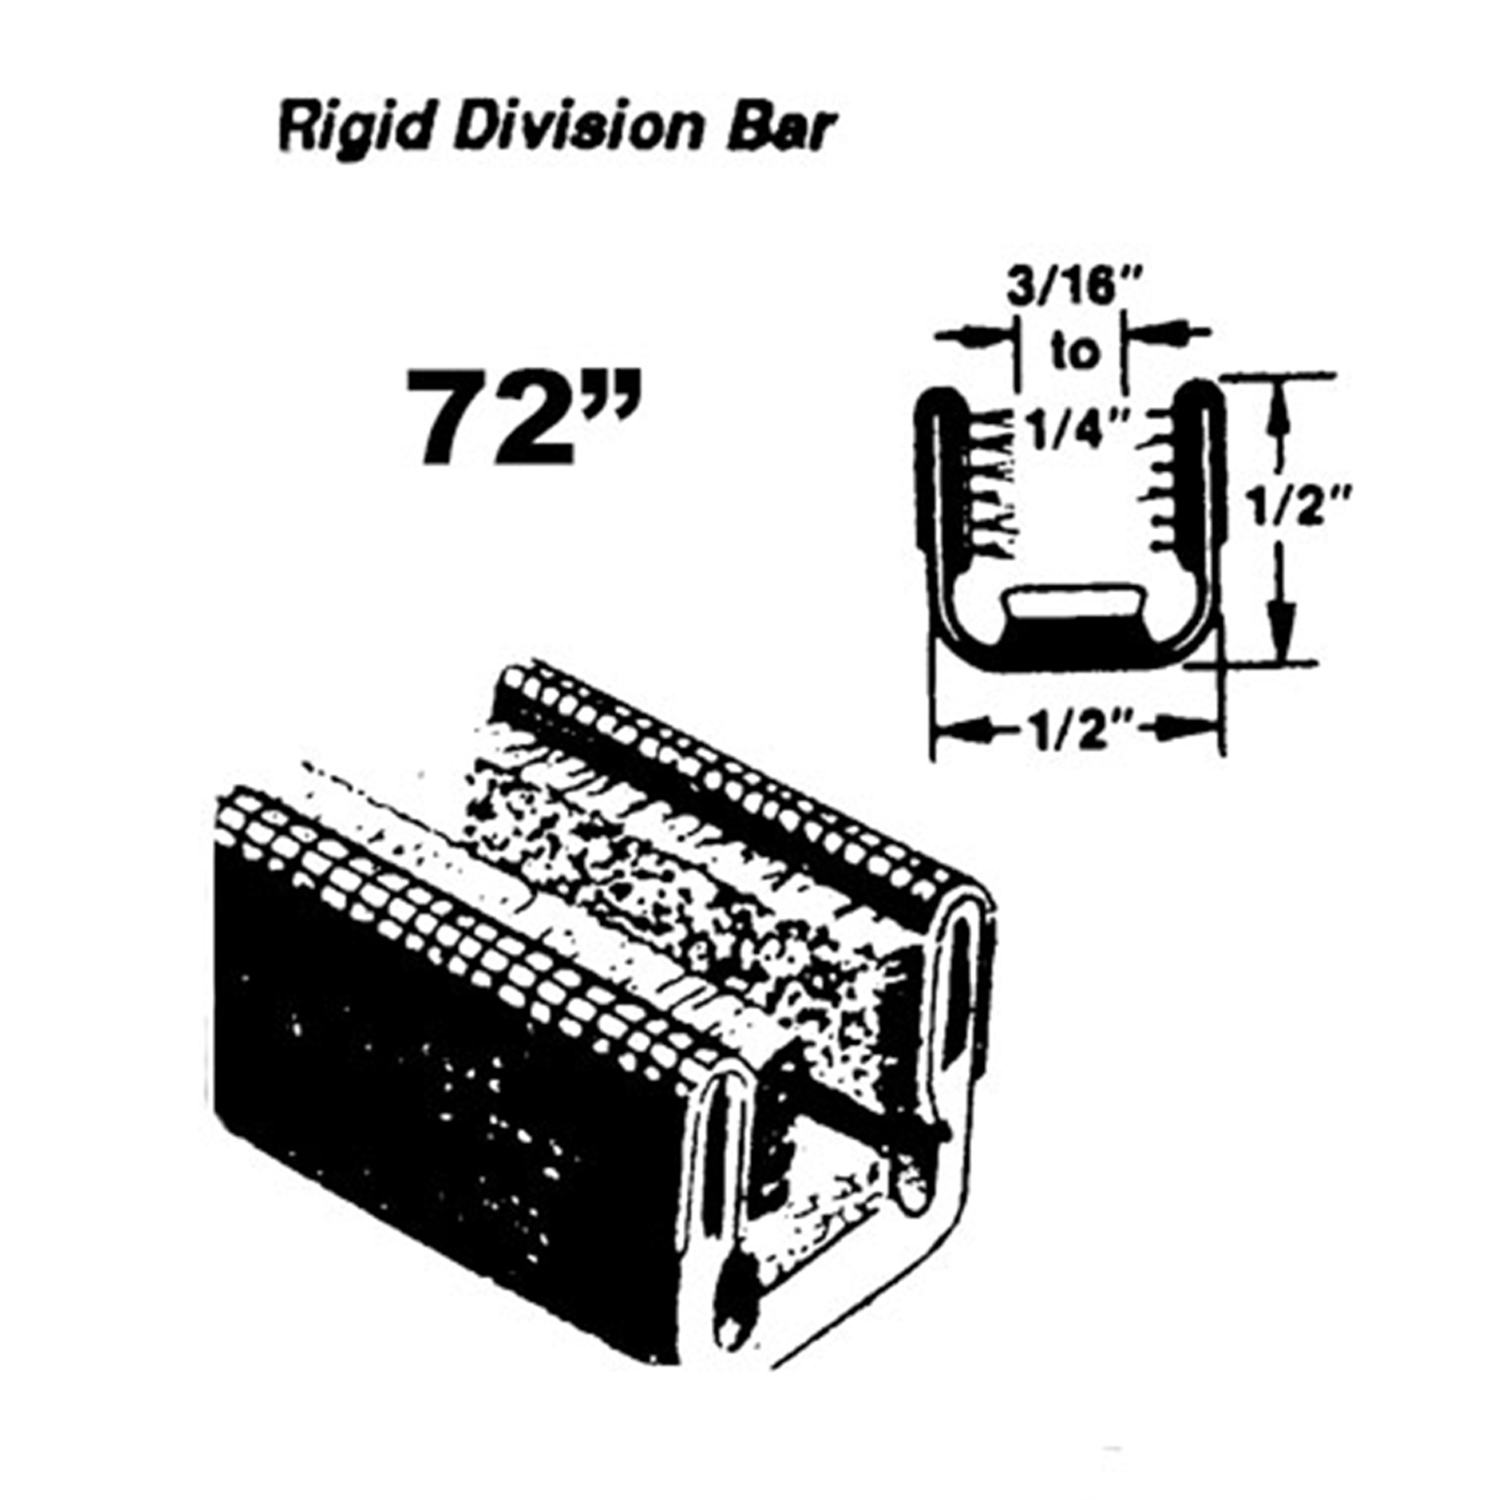 1951 GMC 253-22 Upper and lower rigid division-bar channel-WC 25-72